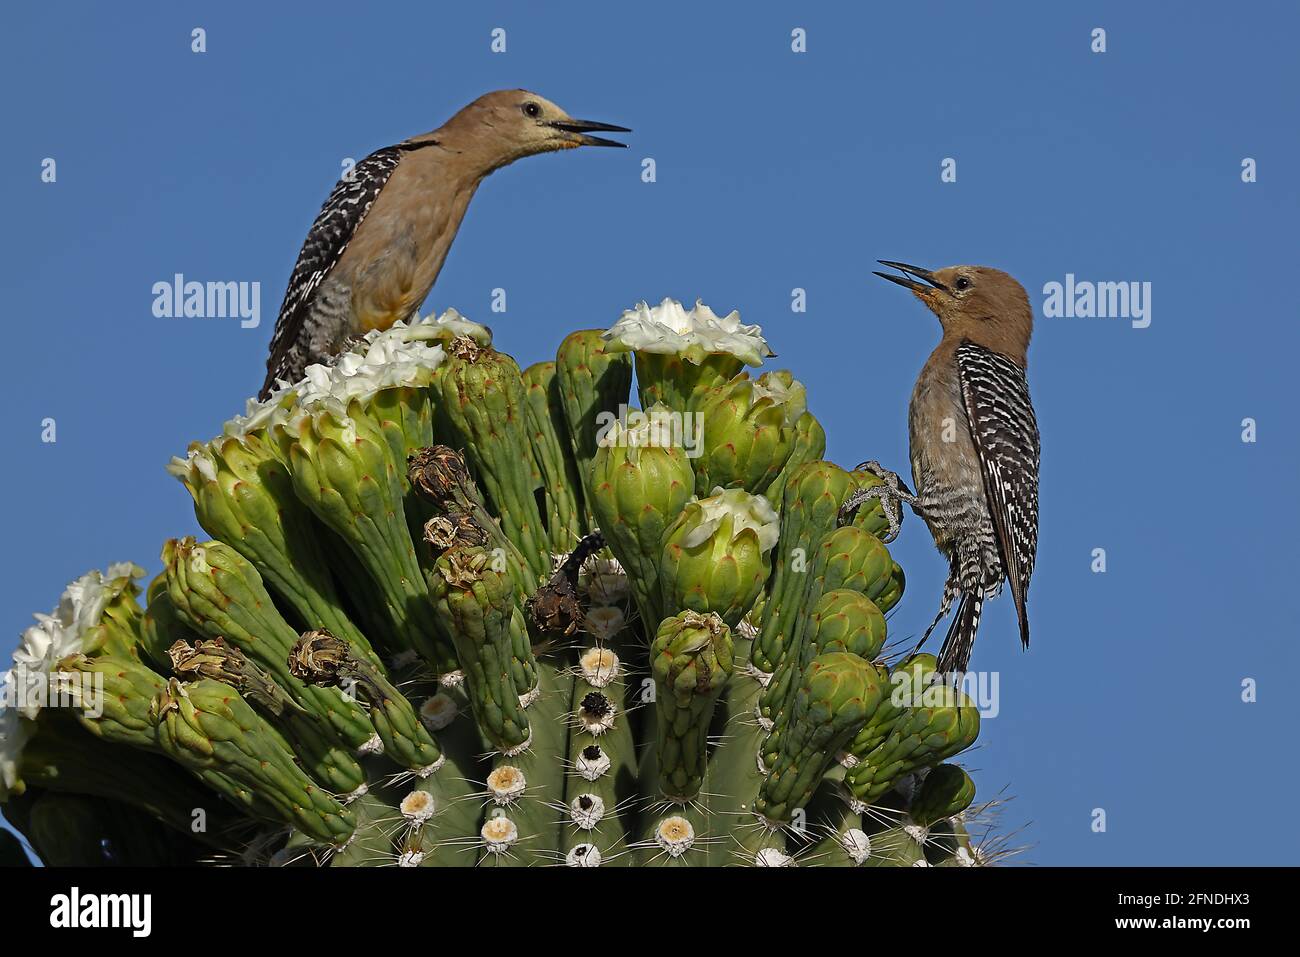 Gila woodpeckers (Melanerpes uropygialis), feeding on nectar from saguaro blossom, one chasing the other off the blossoms,Sonoran desert, Arizona Stock Photo